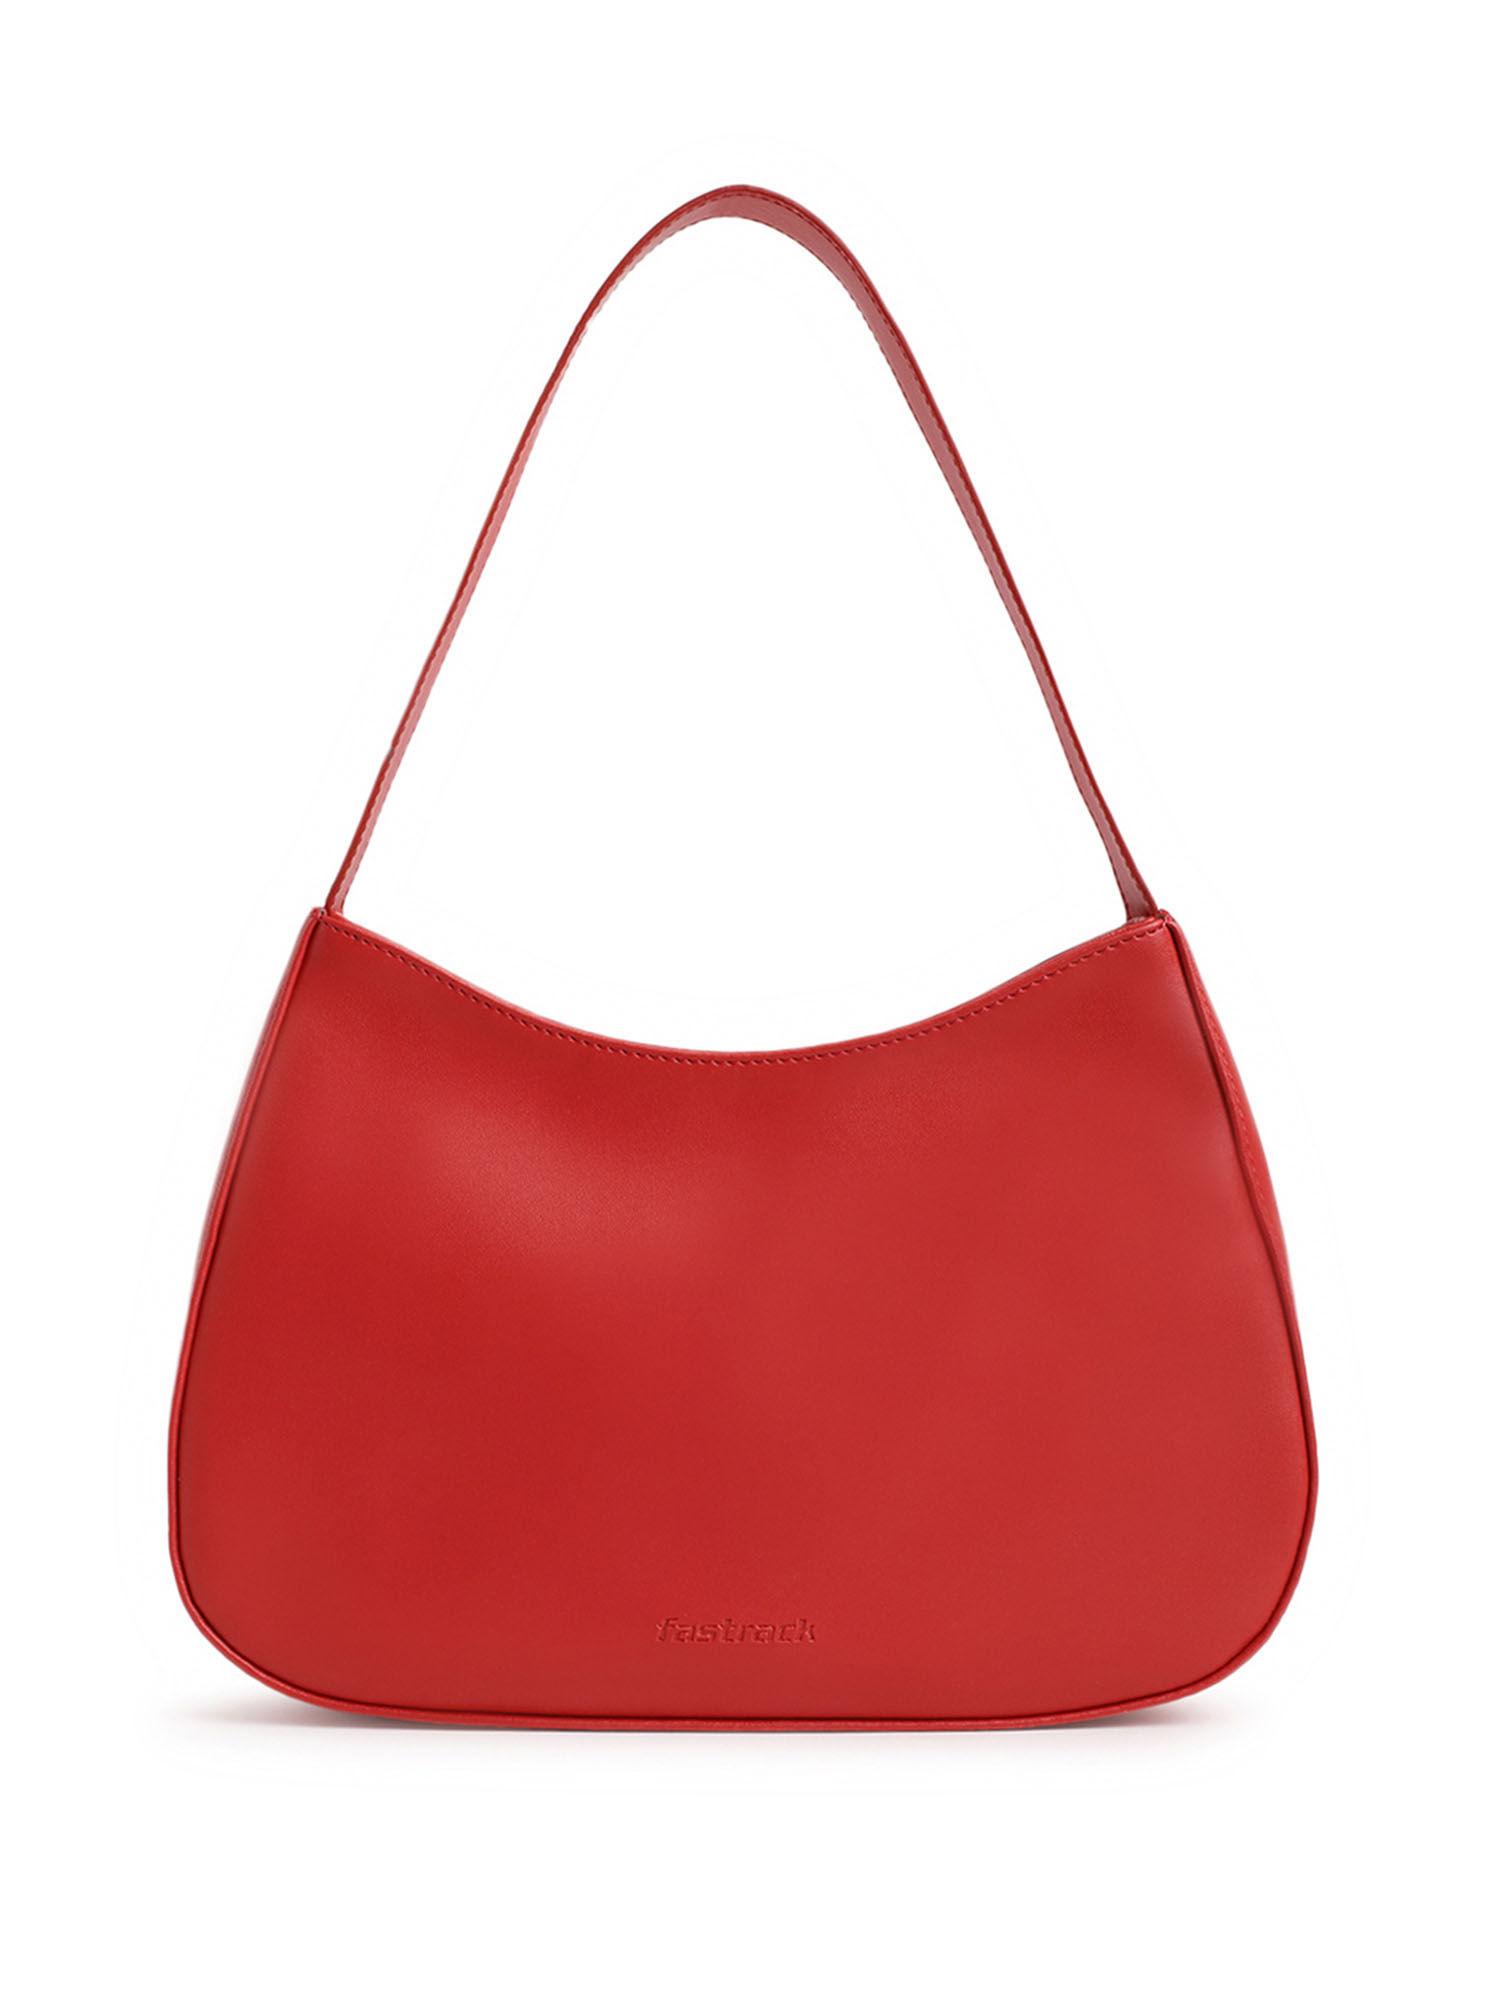 luscious red shoulder bag for women